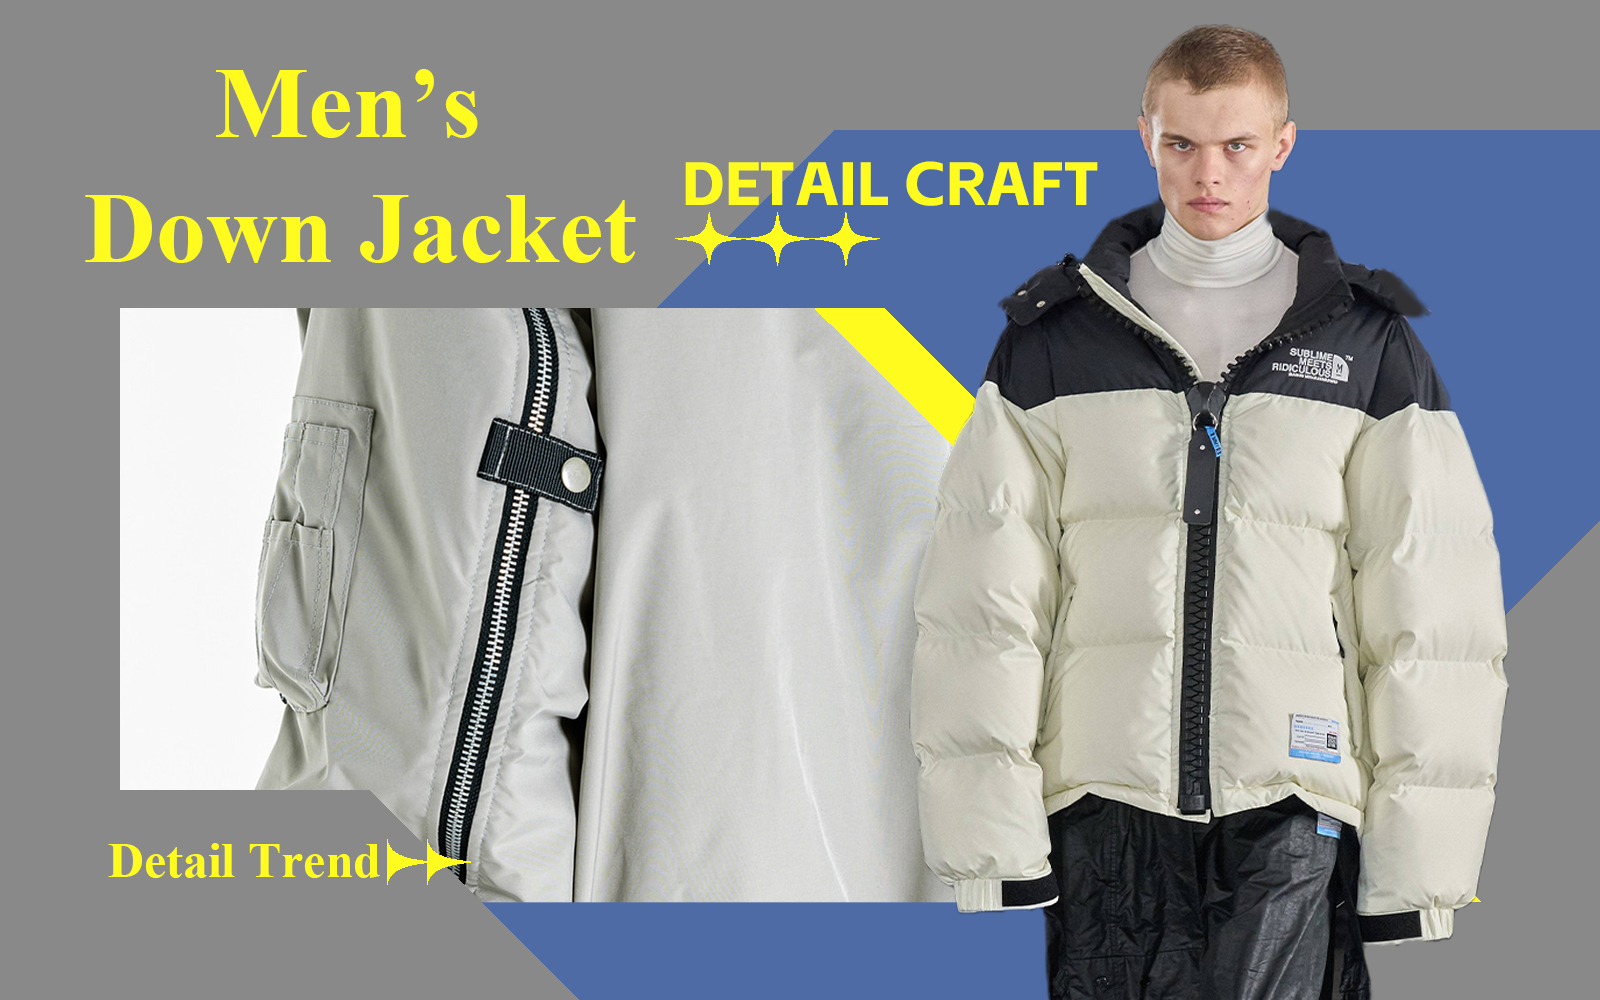 The Detail & Craft Trend for Men's Down Jacket